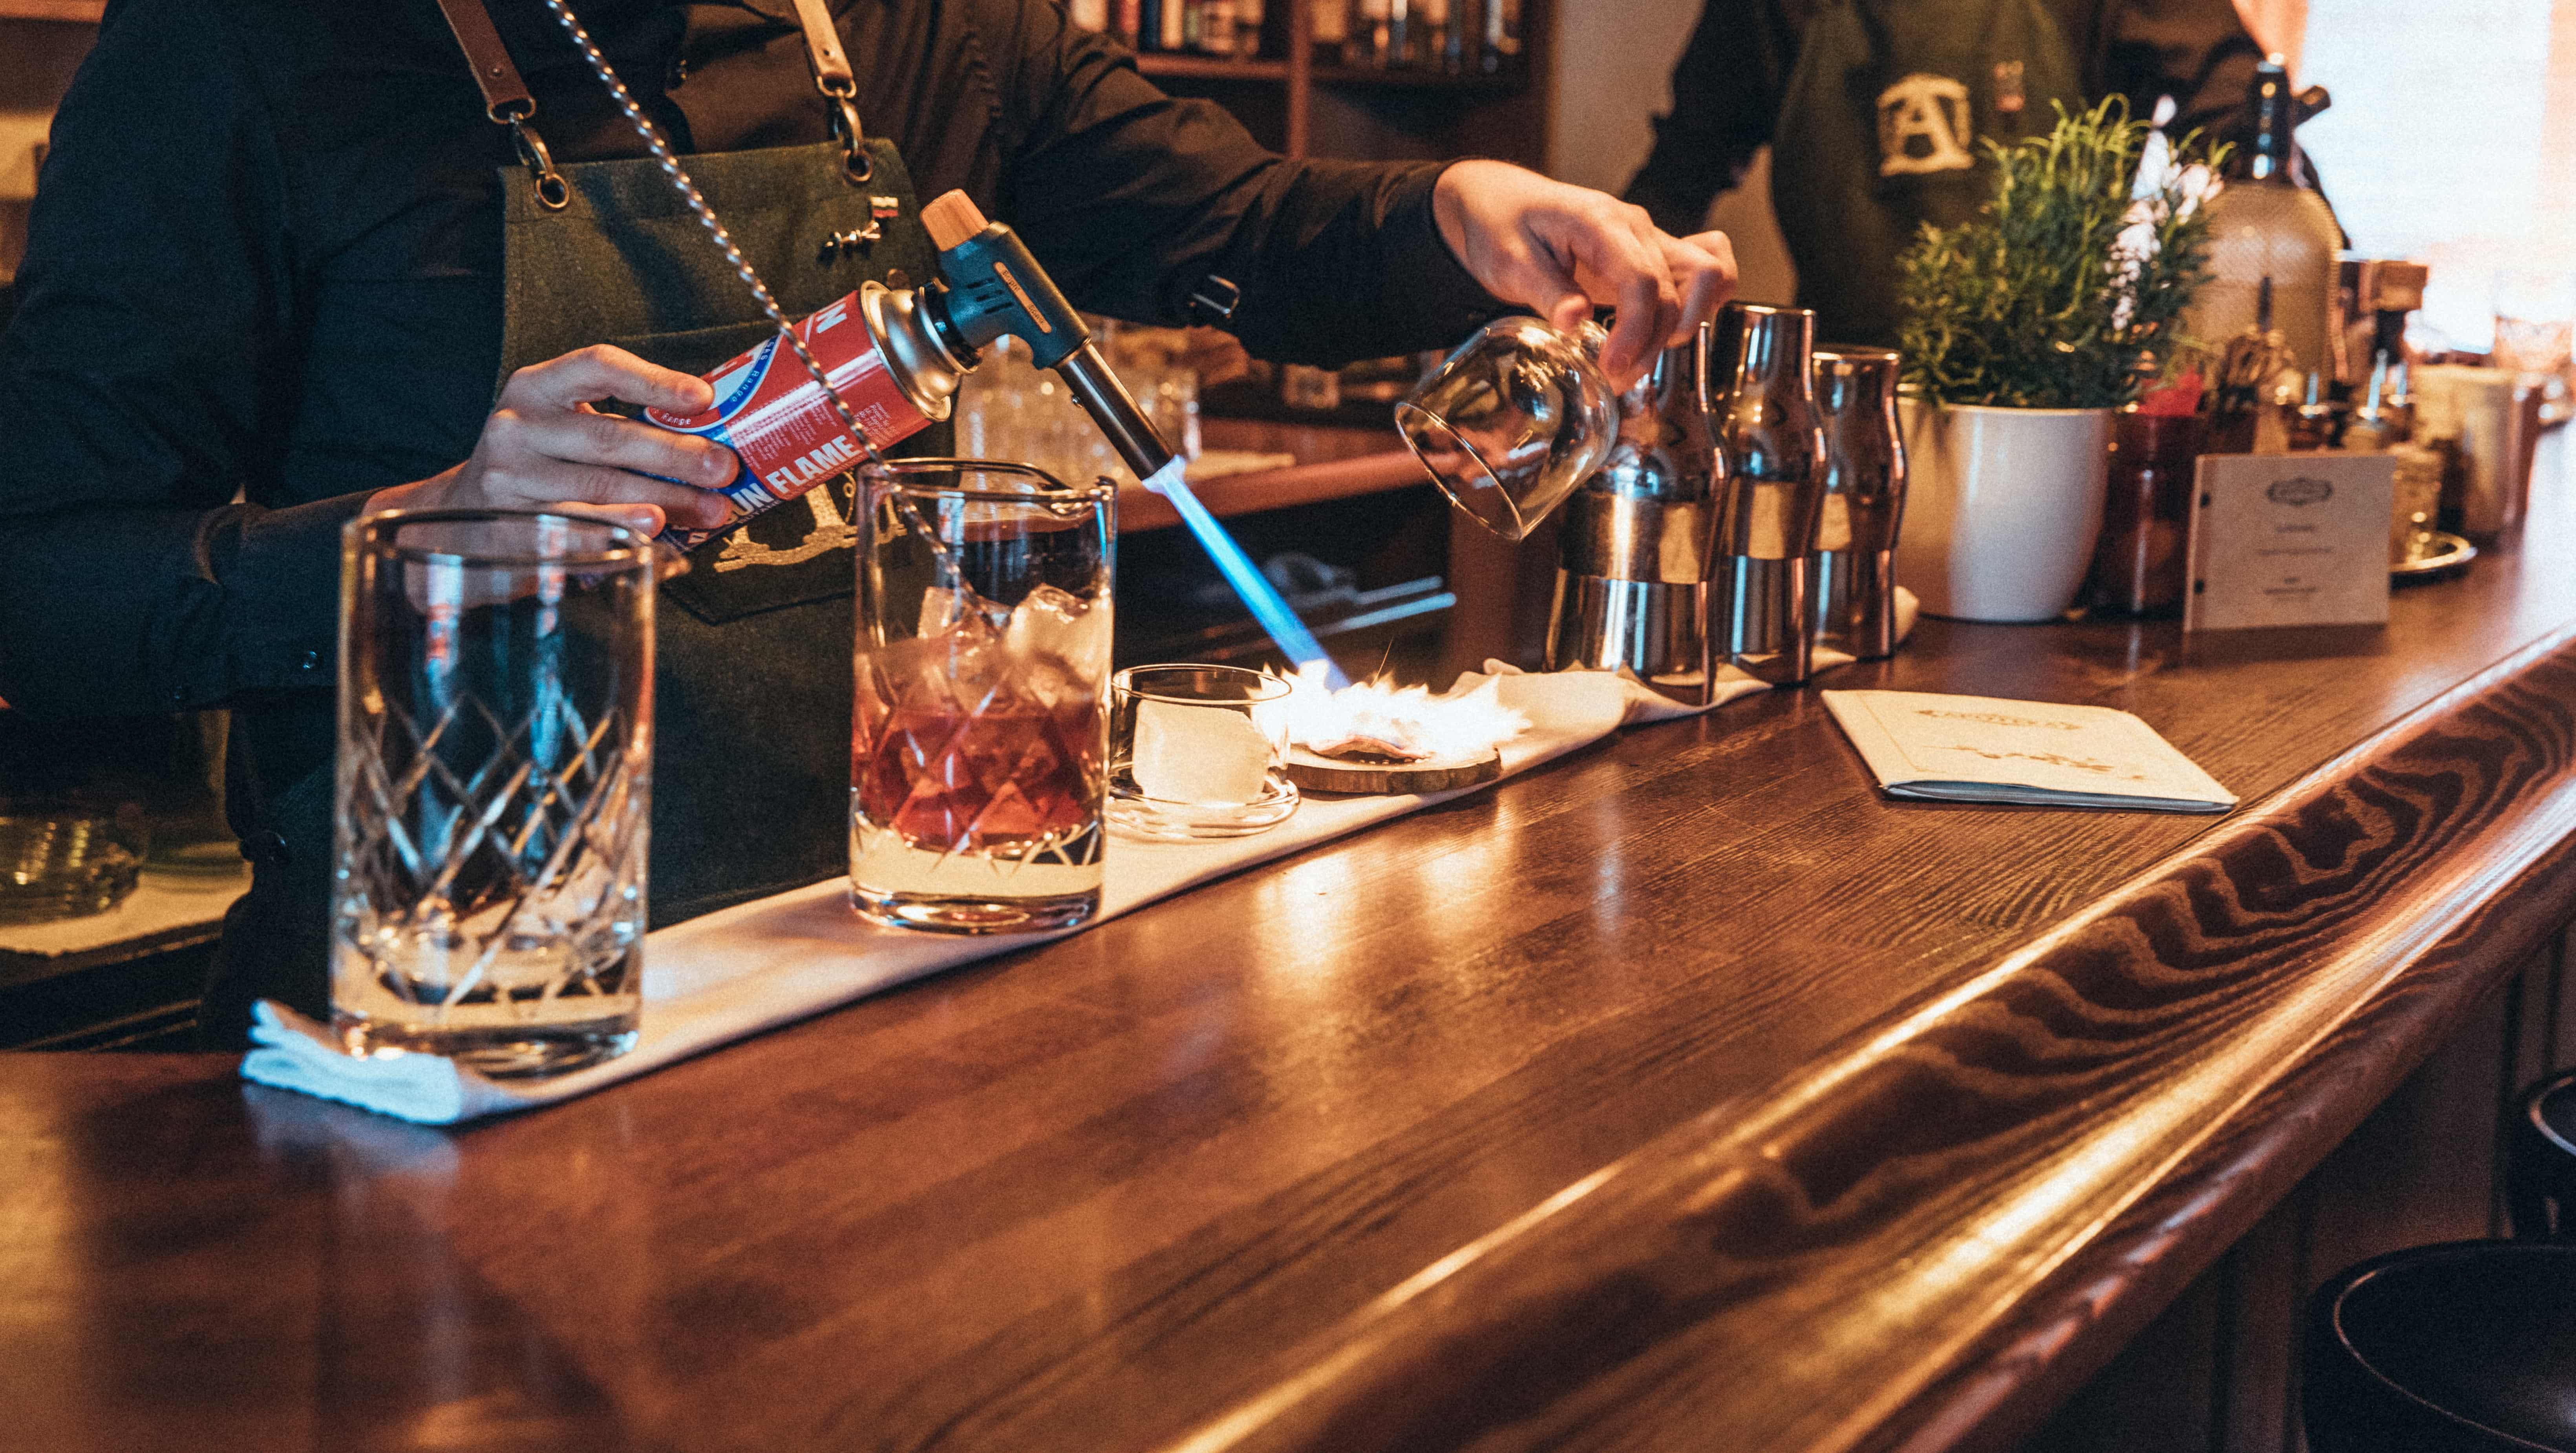 A display of the professionalism that is present for every cocktail made in Apoteka - the bartender's handling a torch in order to create an oak smoke infused cocktail.